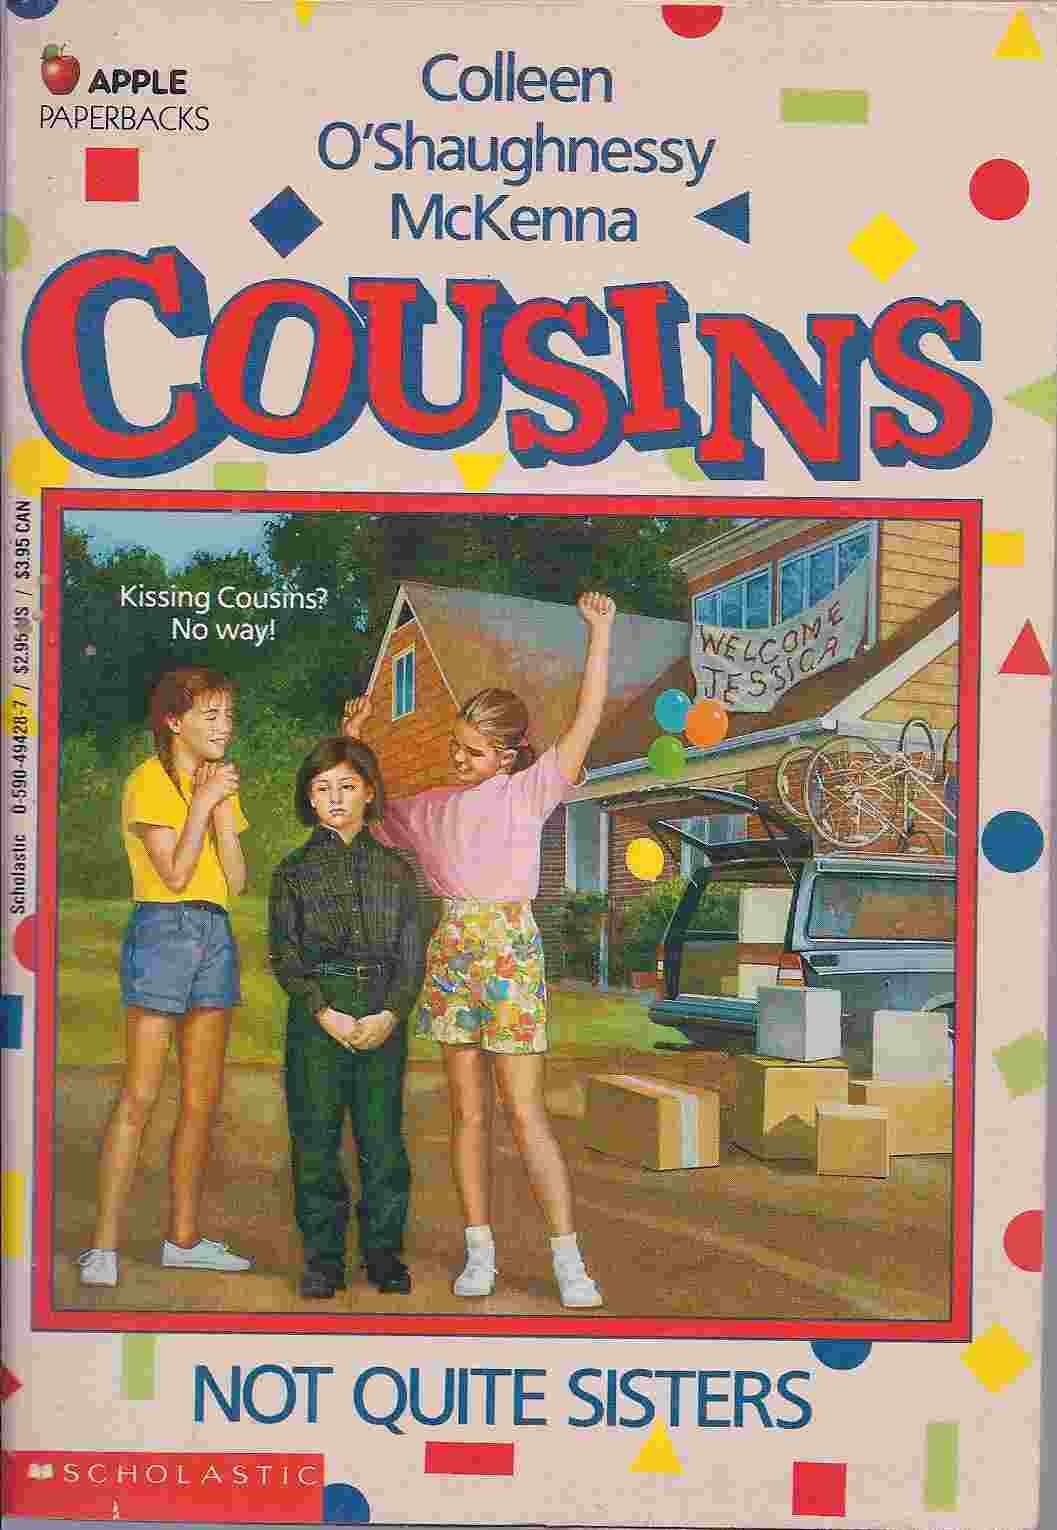 Image of the book cover for Cousins: Not Quite Sisters